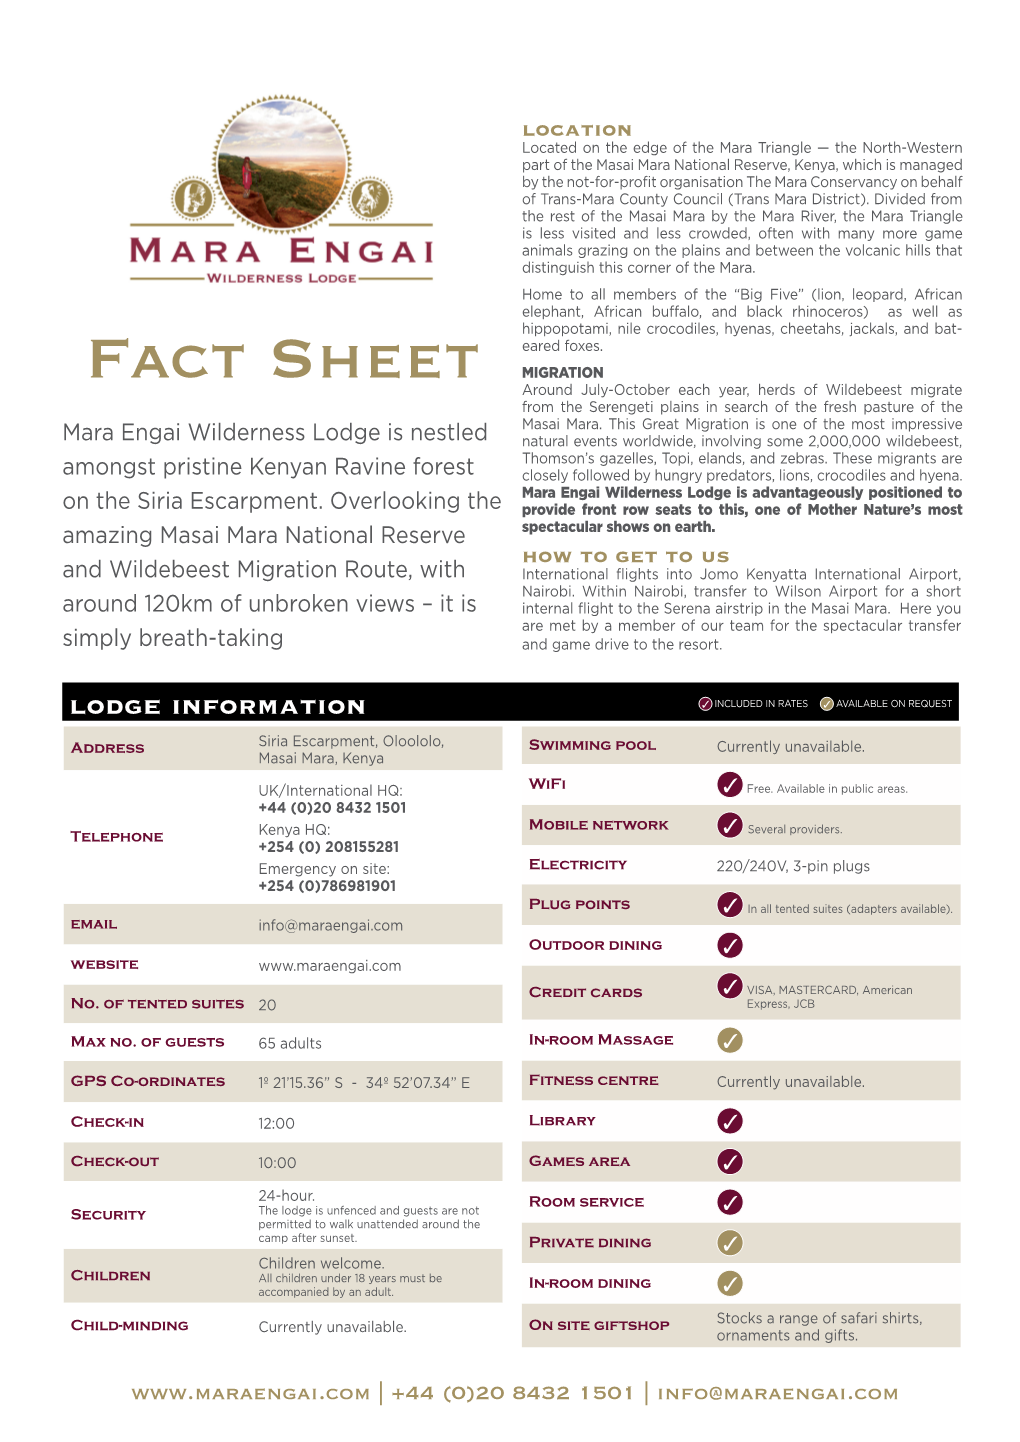 Fact Sheet MIGRATION Around July-October Each Year, Herds of Wildebeest Migrate from the Serengeti Plains in Search of the Fresh Pasture of the Masai Mara